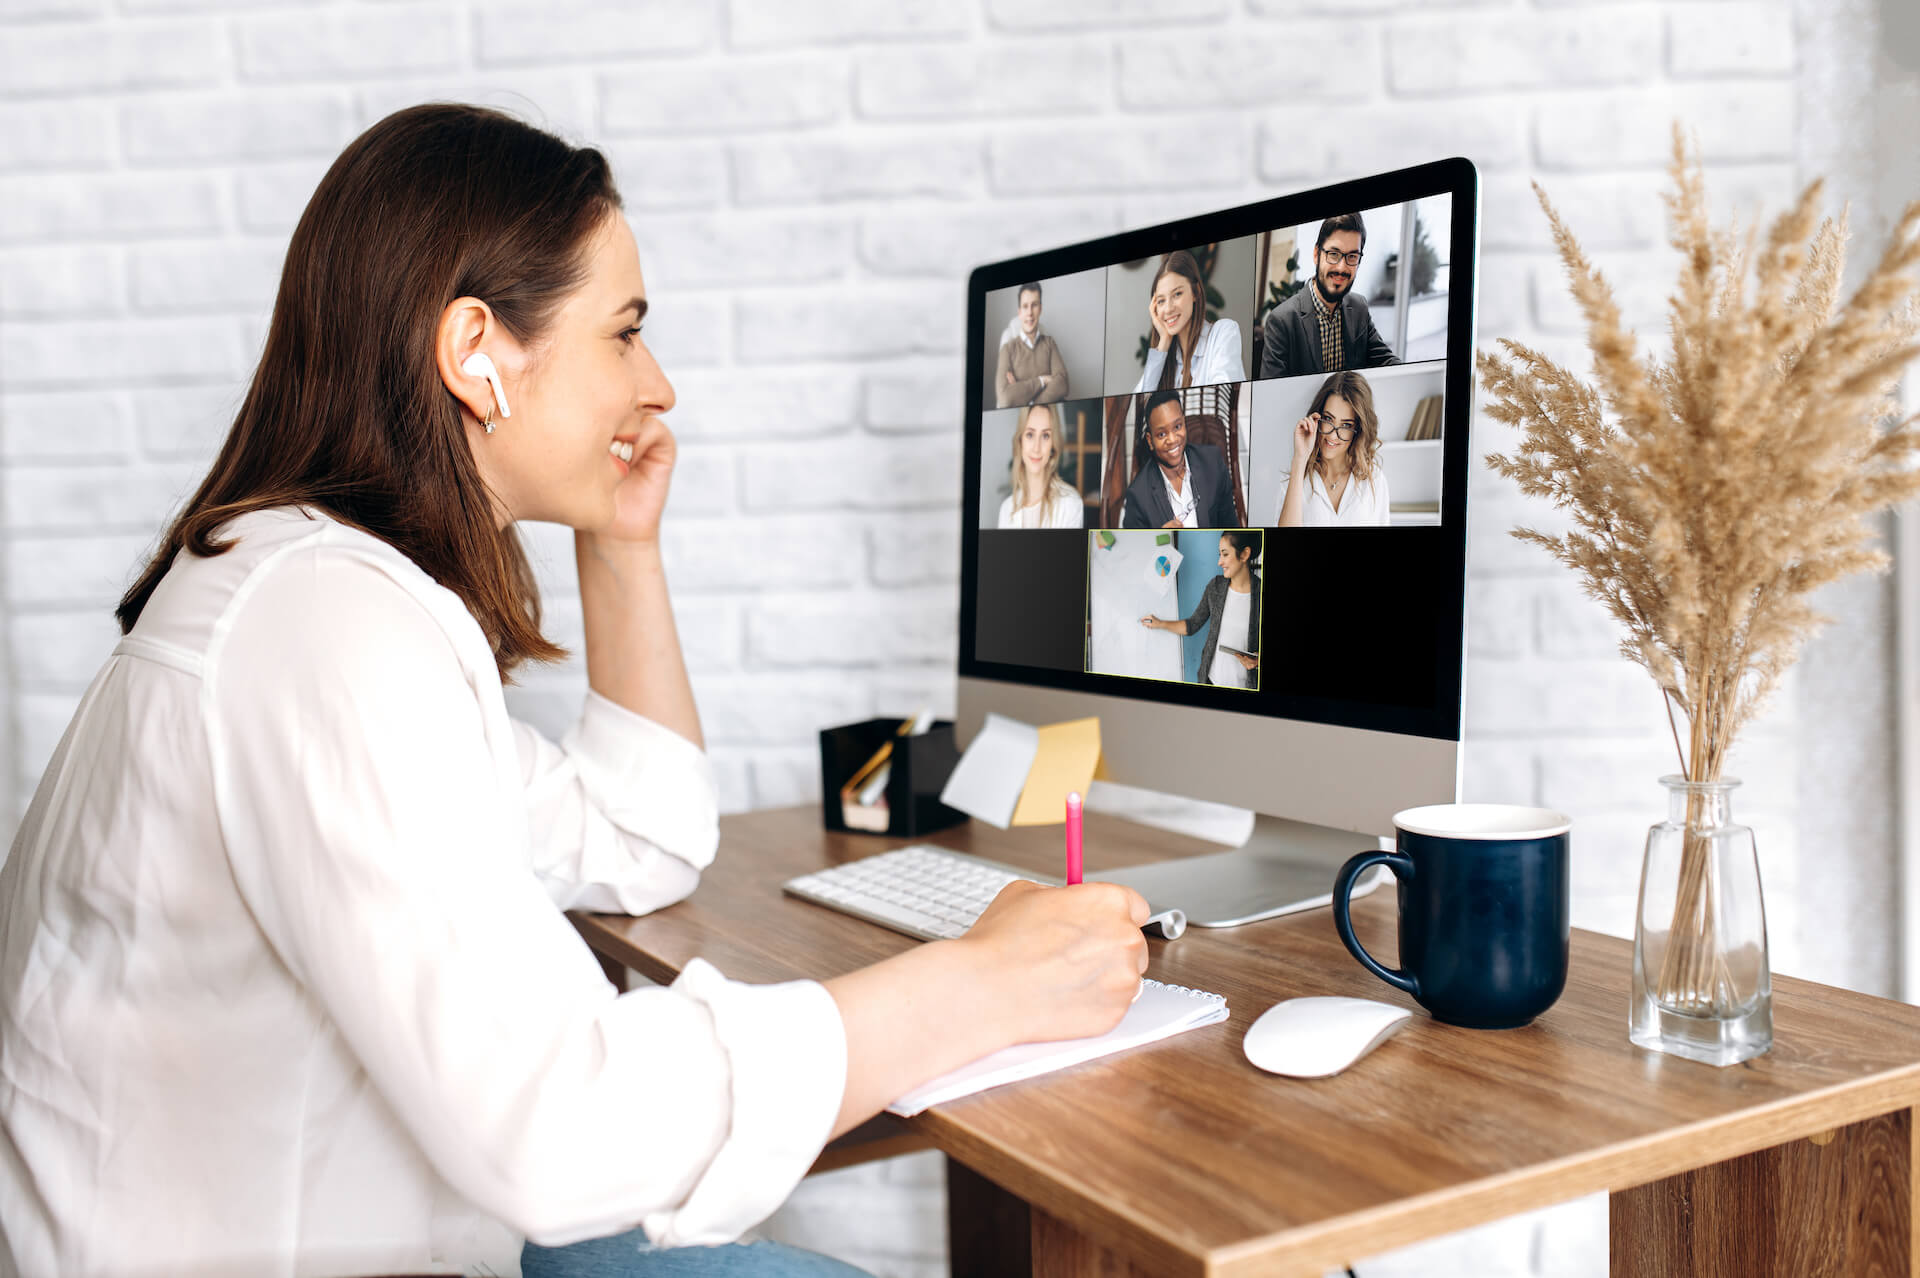 Communication with Clients via Video Call for Efficient CGI Project Workflow